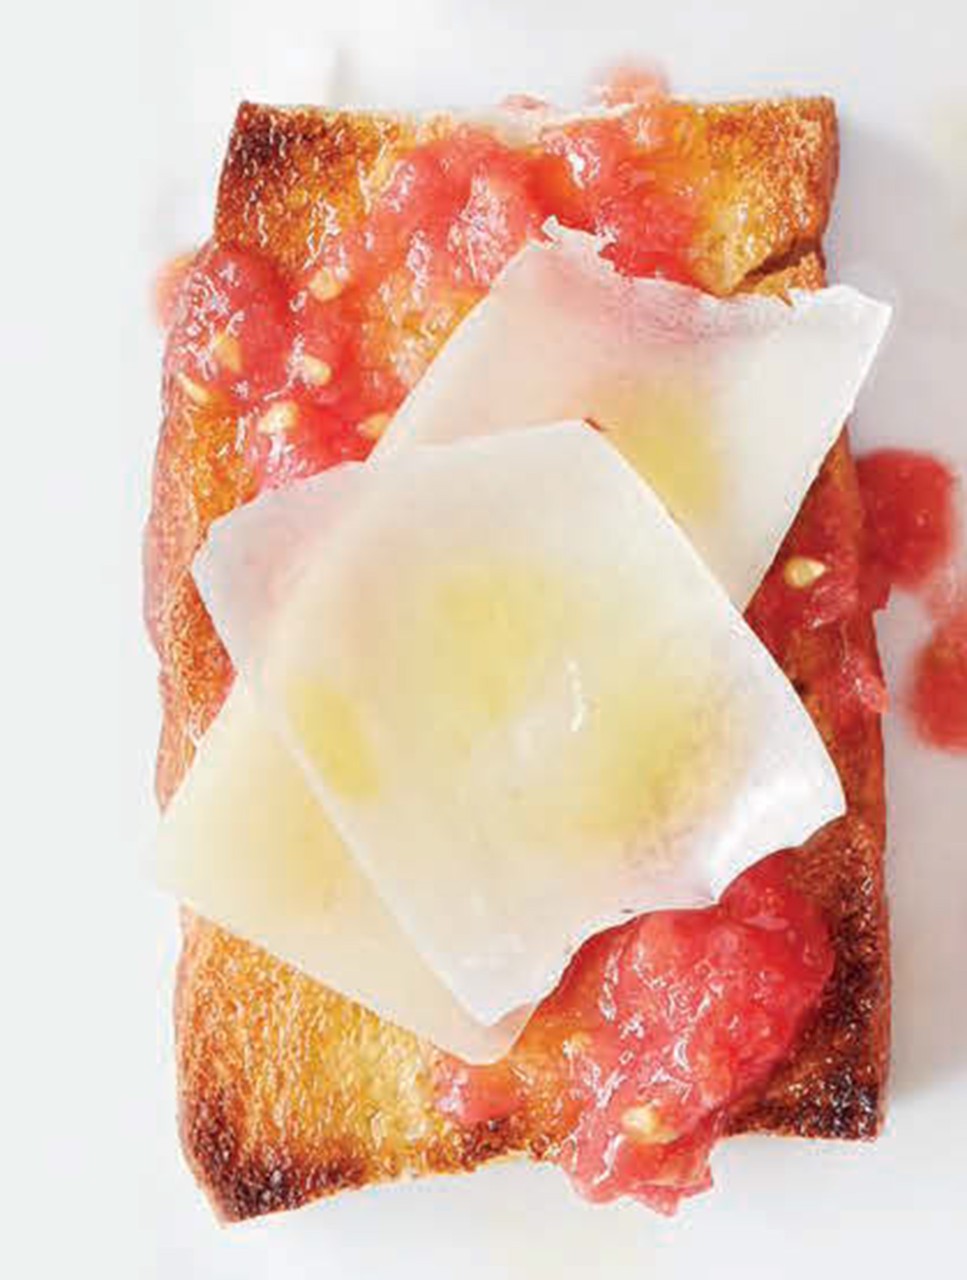 Pan Con Tomate Crostini with Manchego